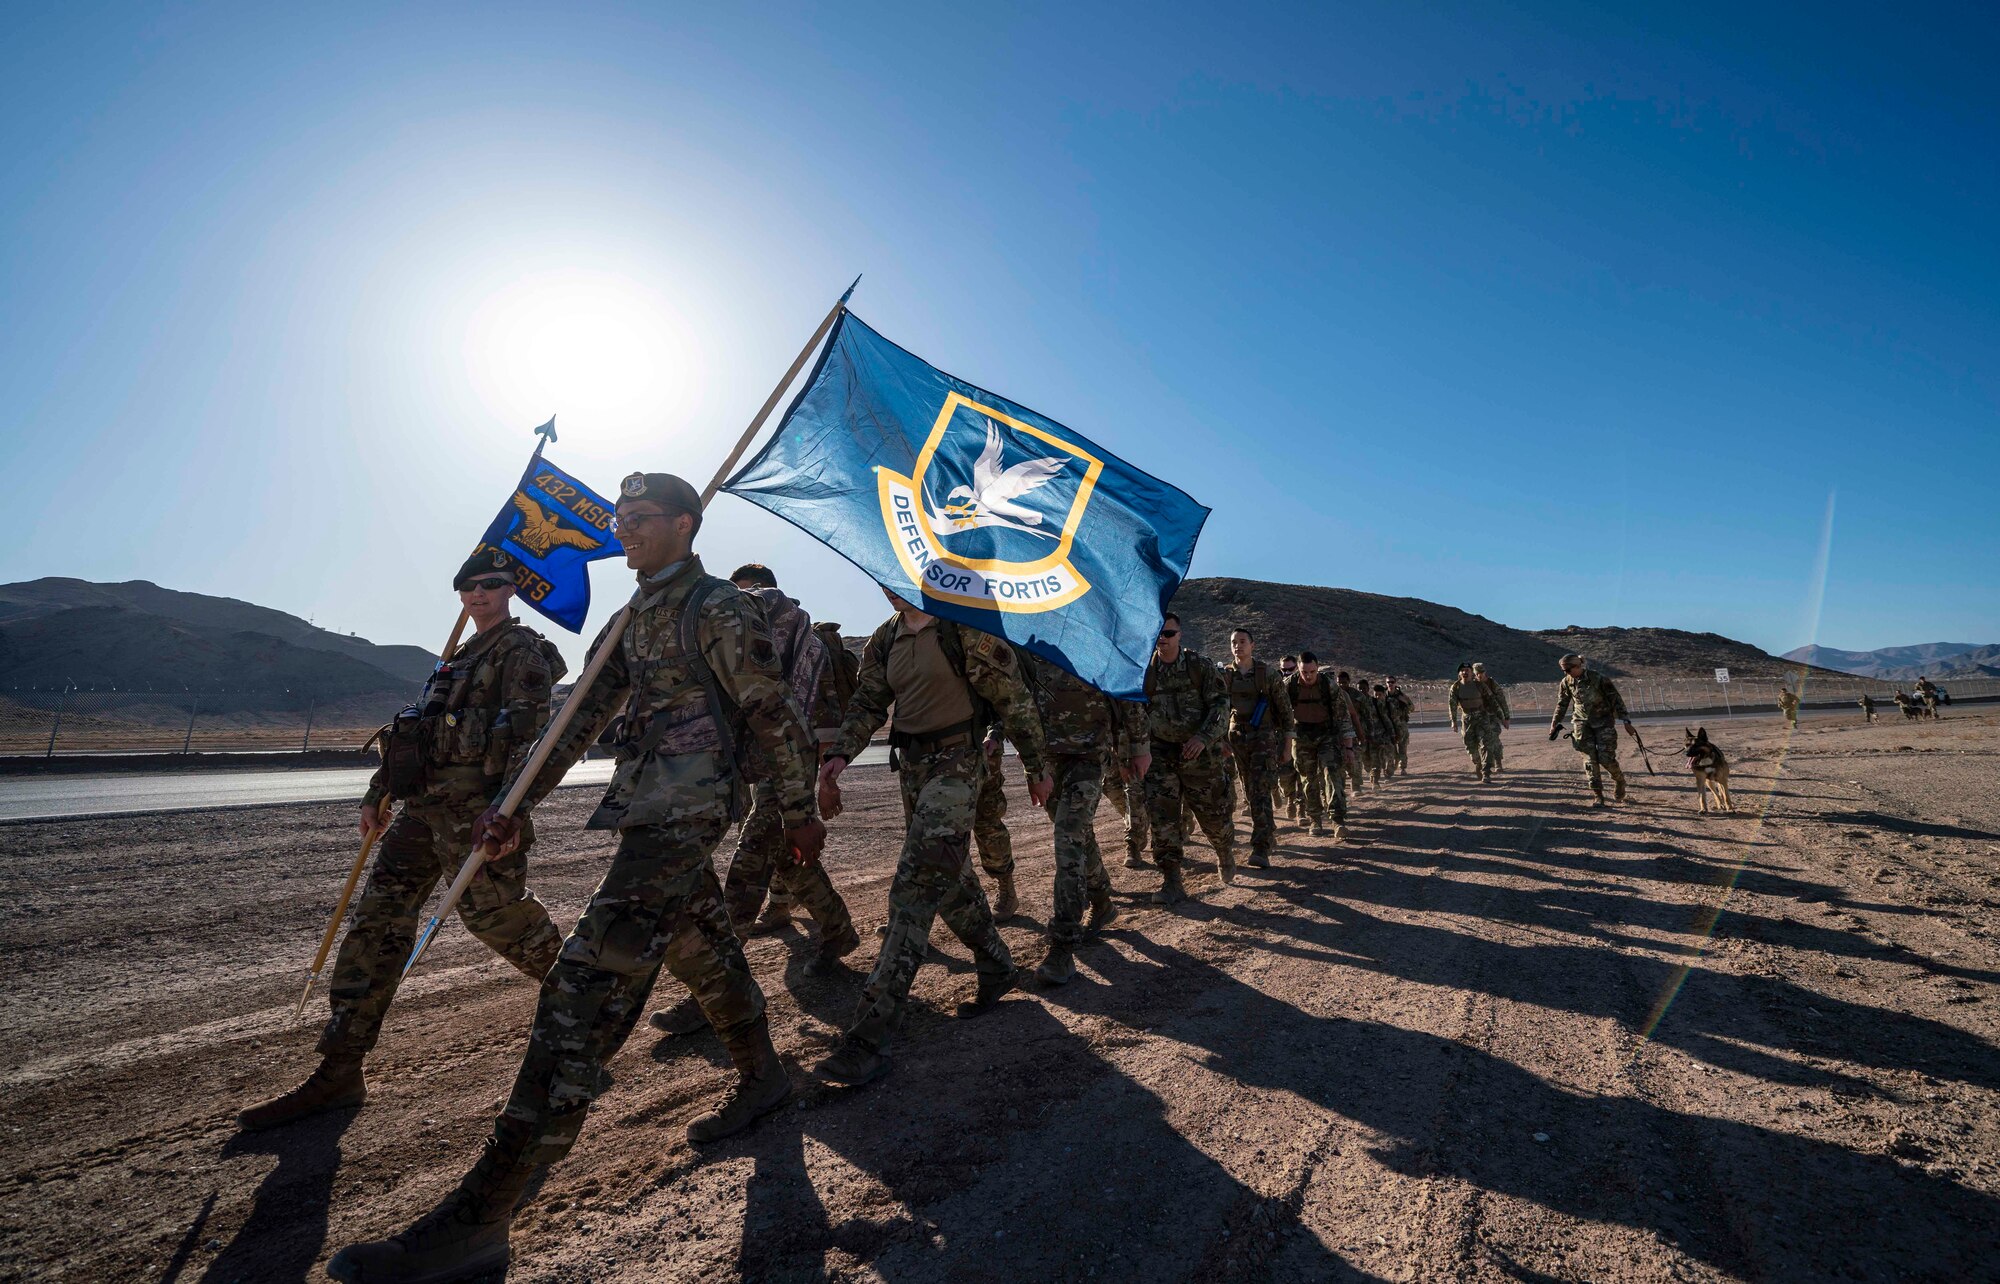 Airmen carry flags during a ruck march.